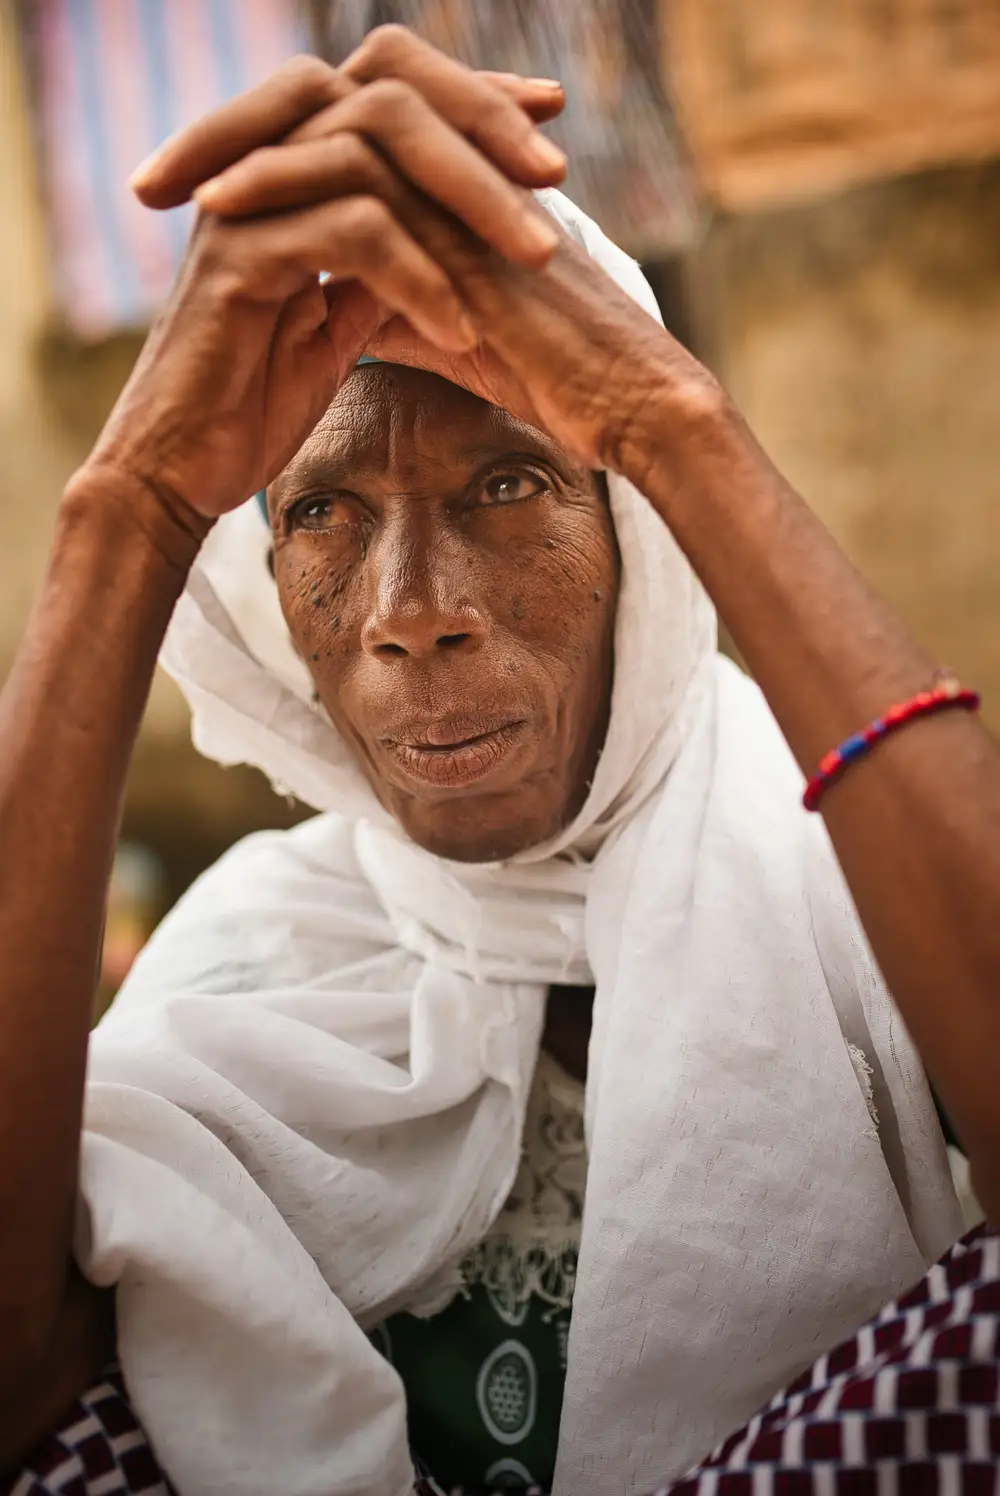 Portraits of a 90-year-old Fulani woman who migrated and now lives in the town of Nmanduono.